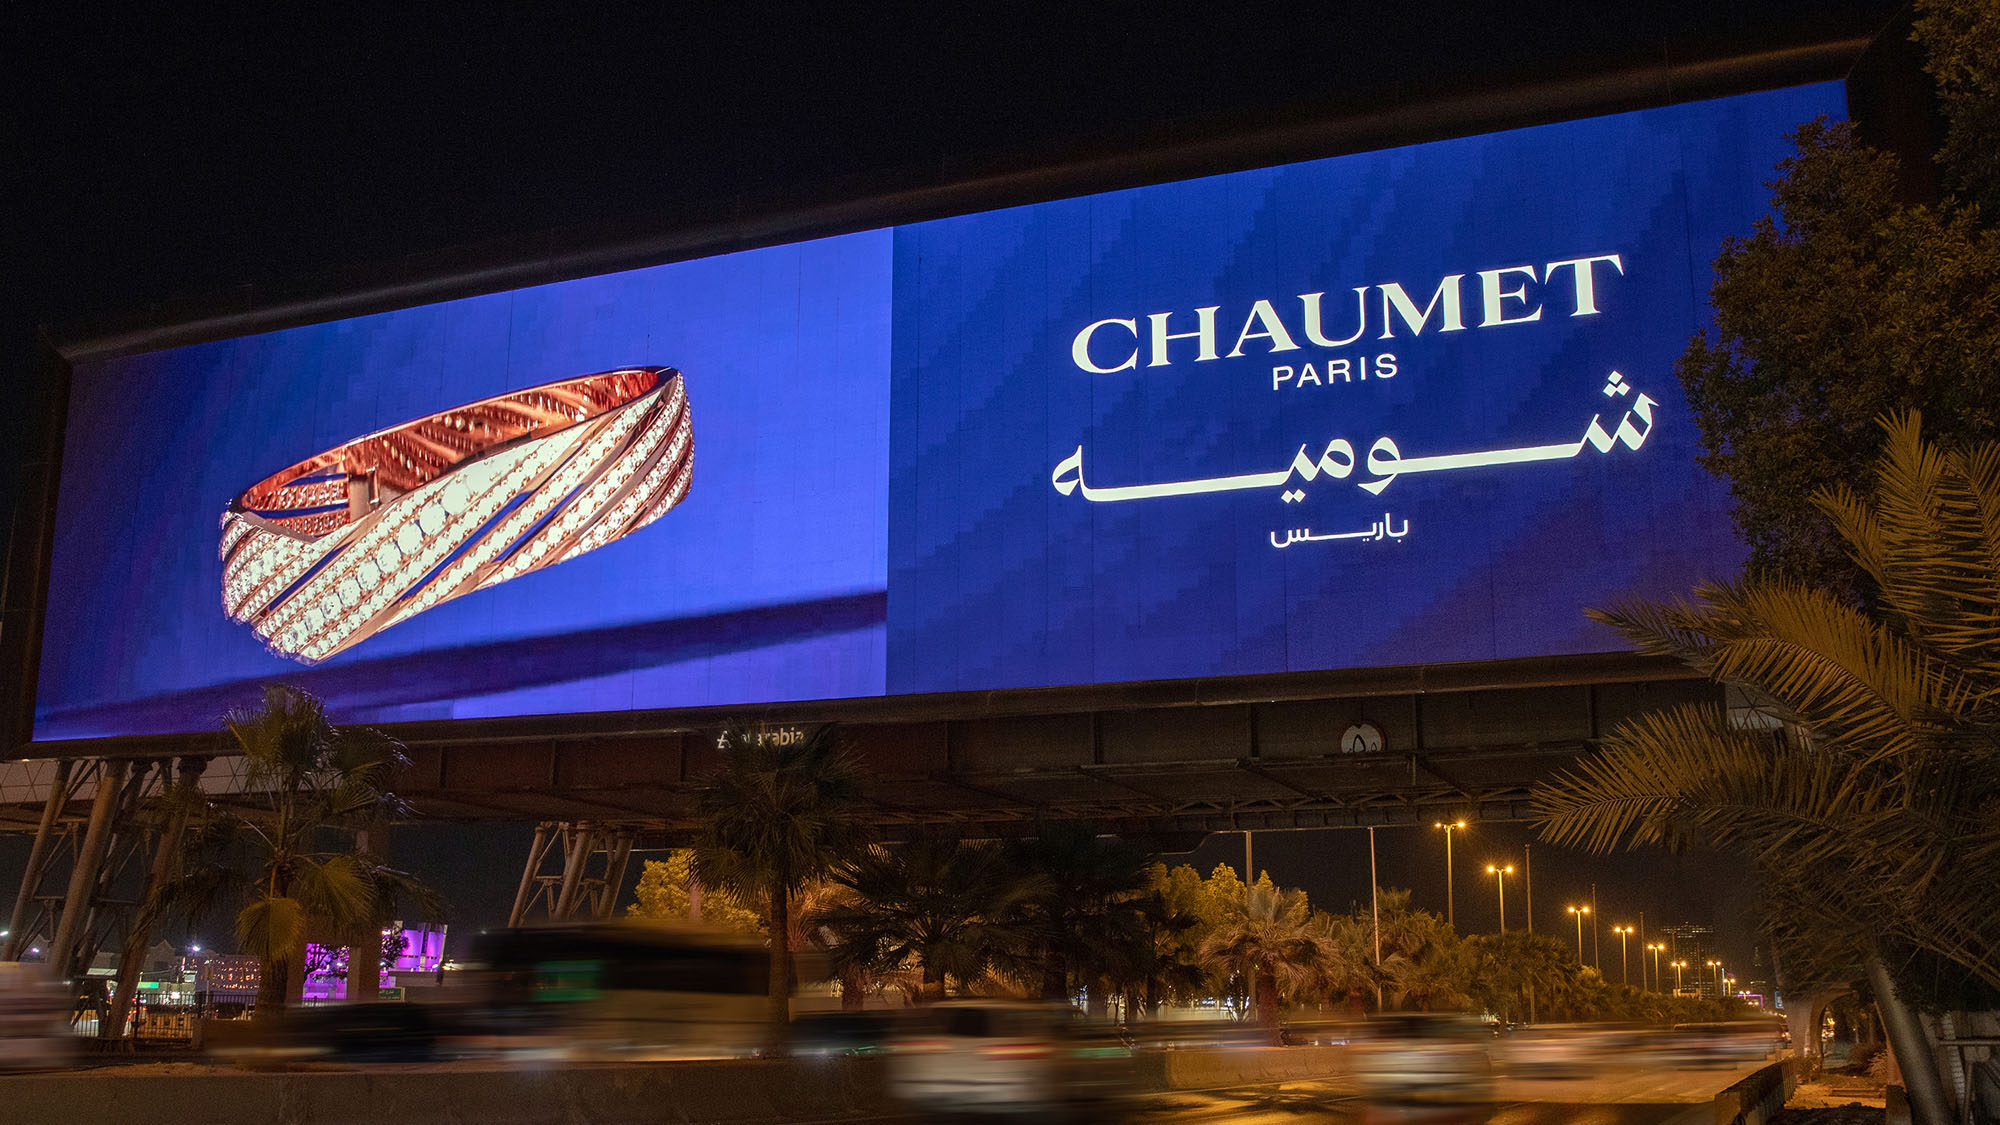 Chaumet Sign With A Photo Of A Jewelled Wristband Above A Highway